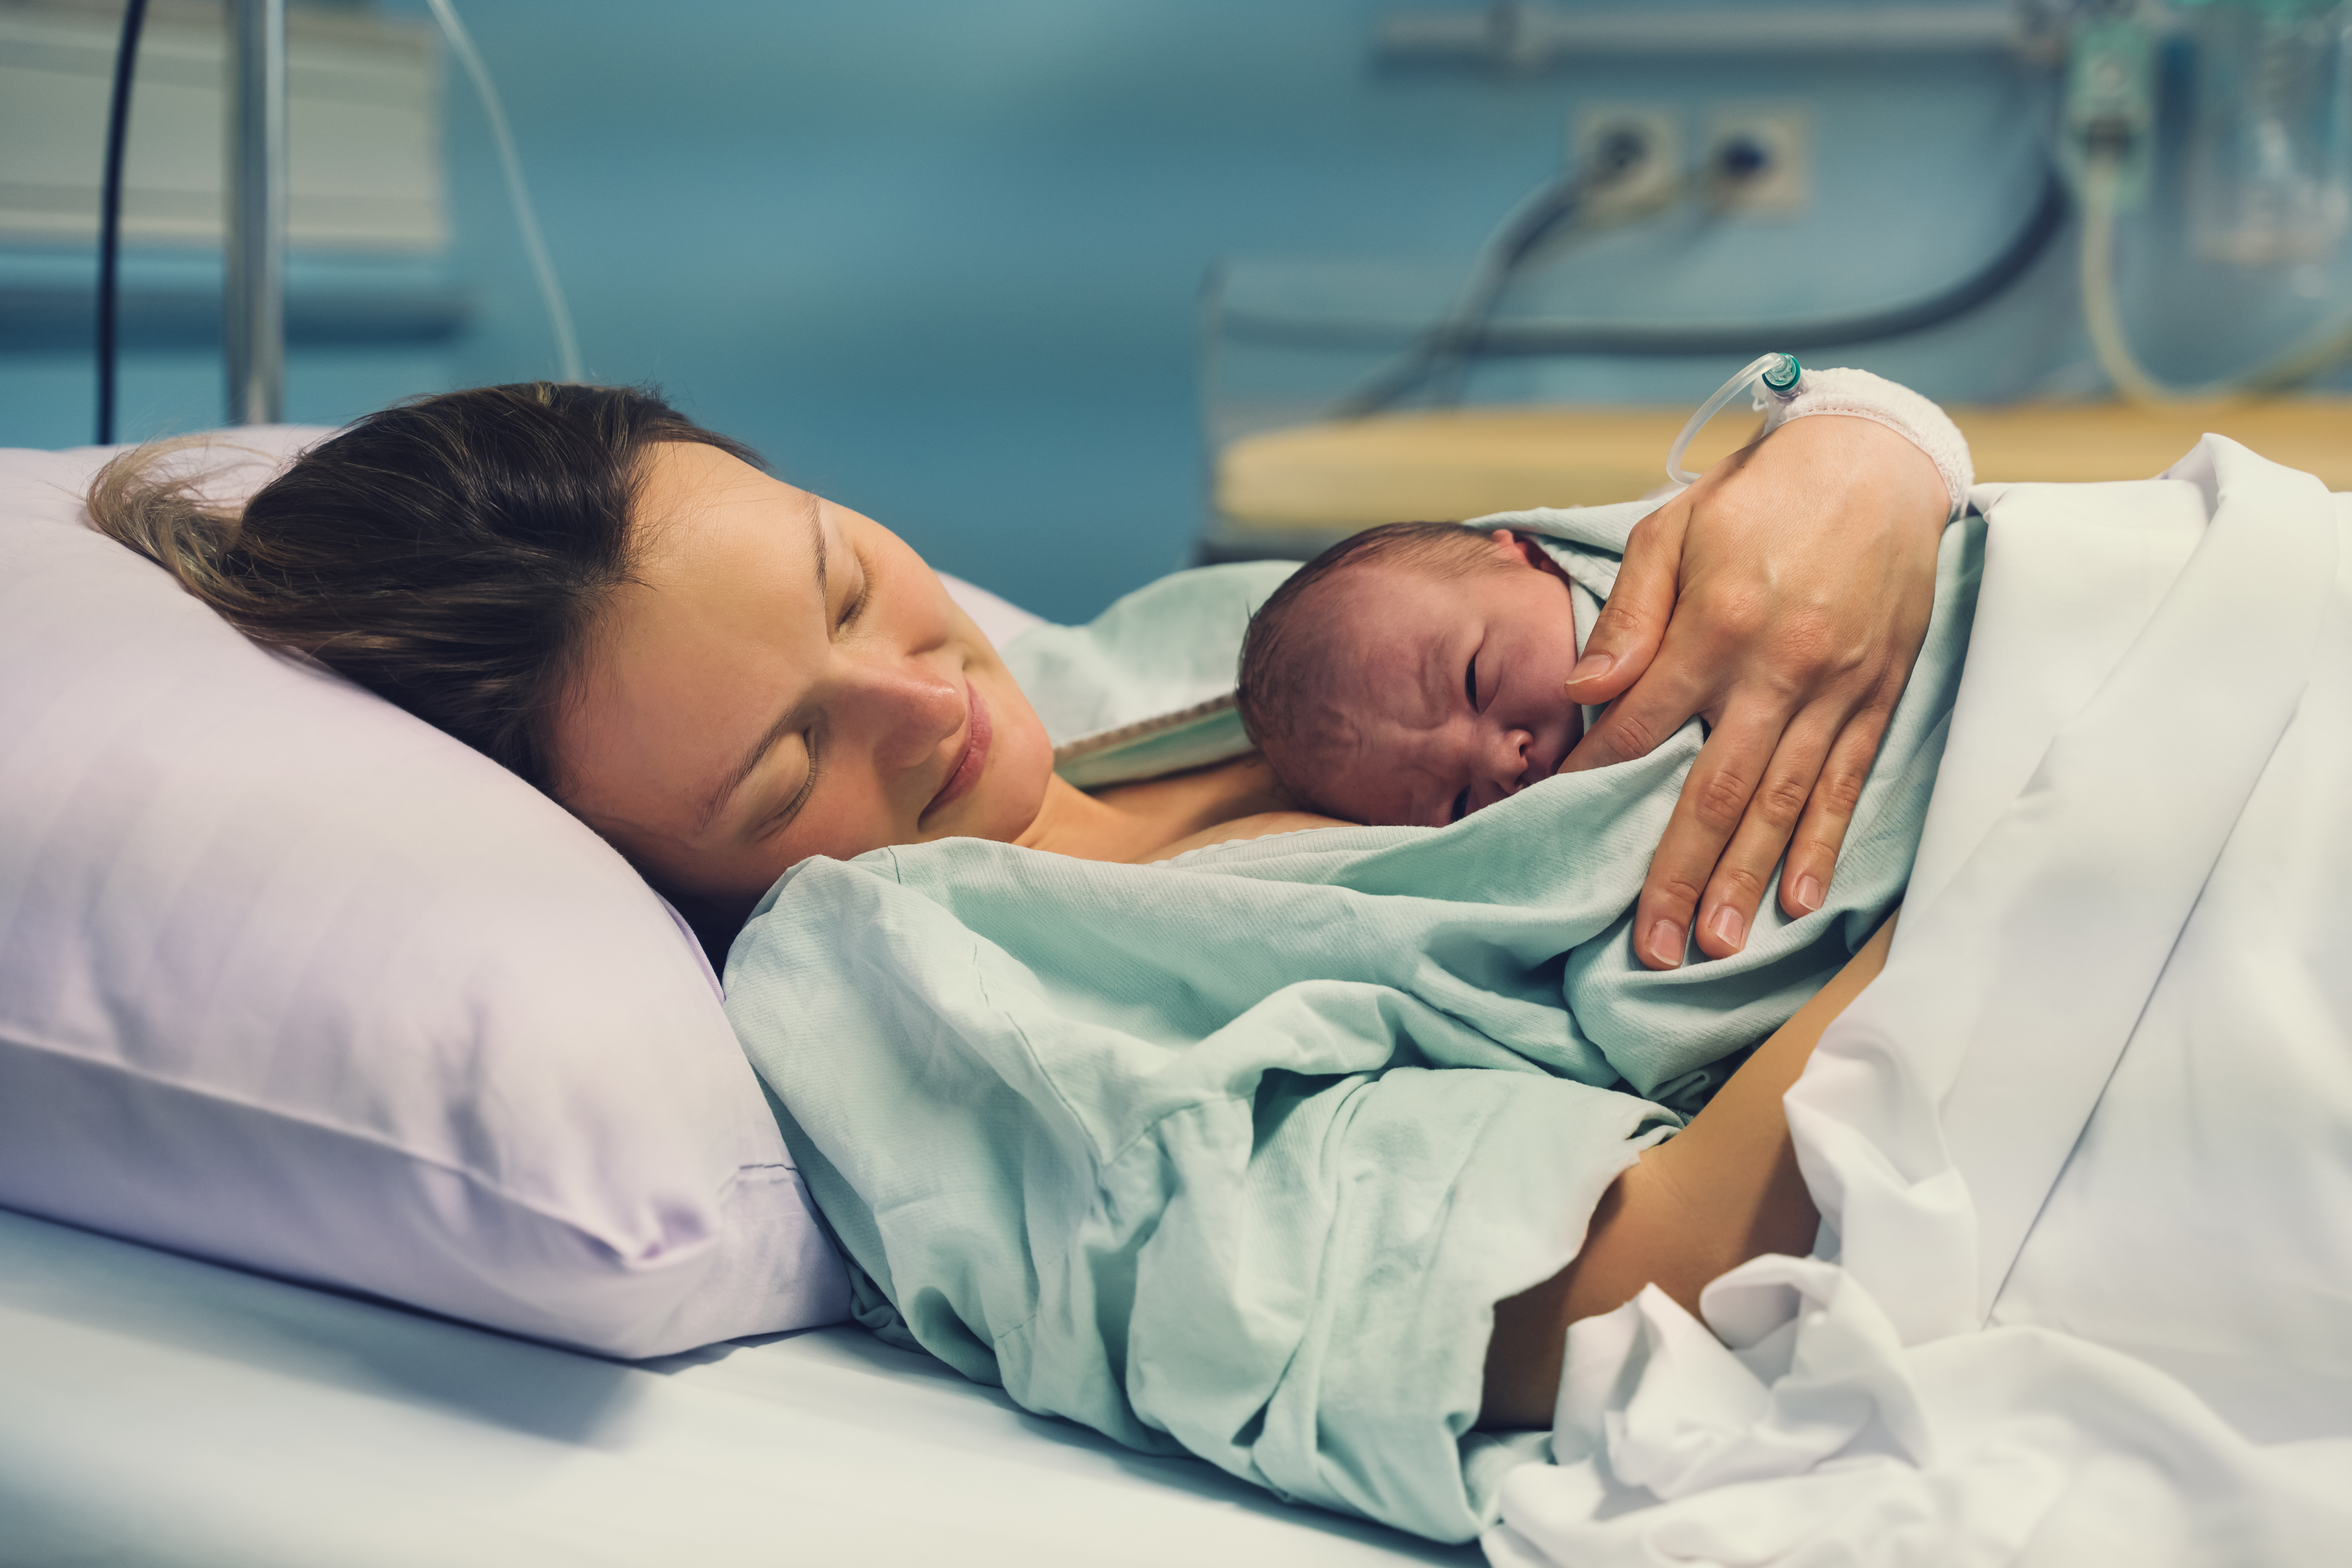 A mother with her newborn baby in hospital | Source: Shutterstock